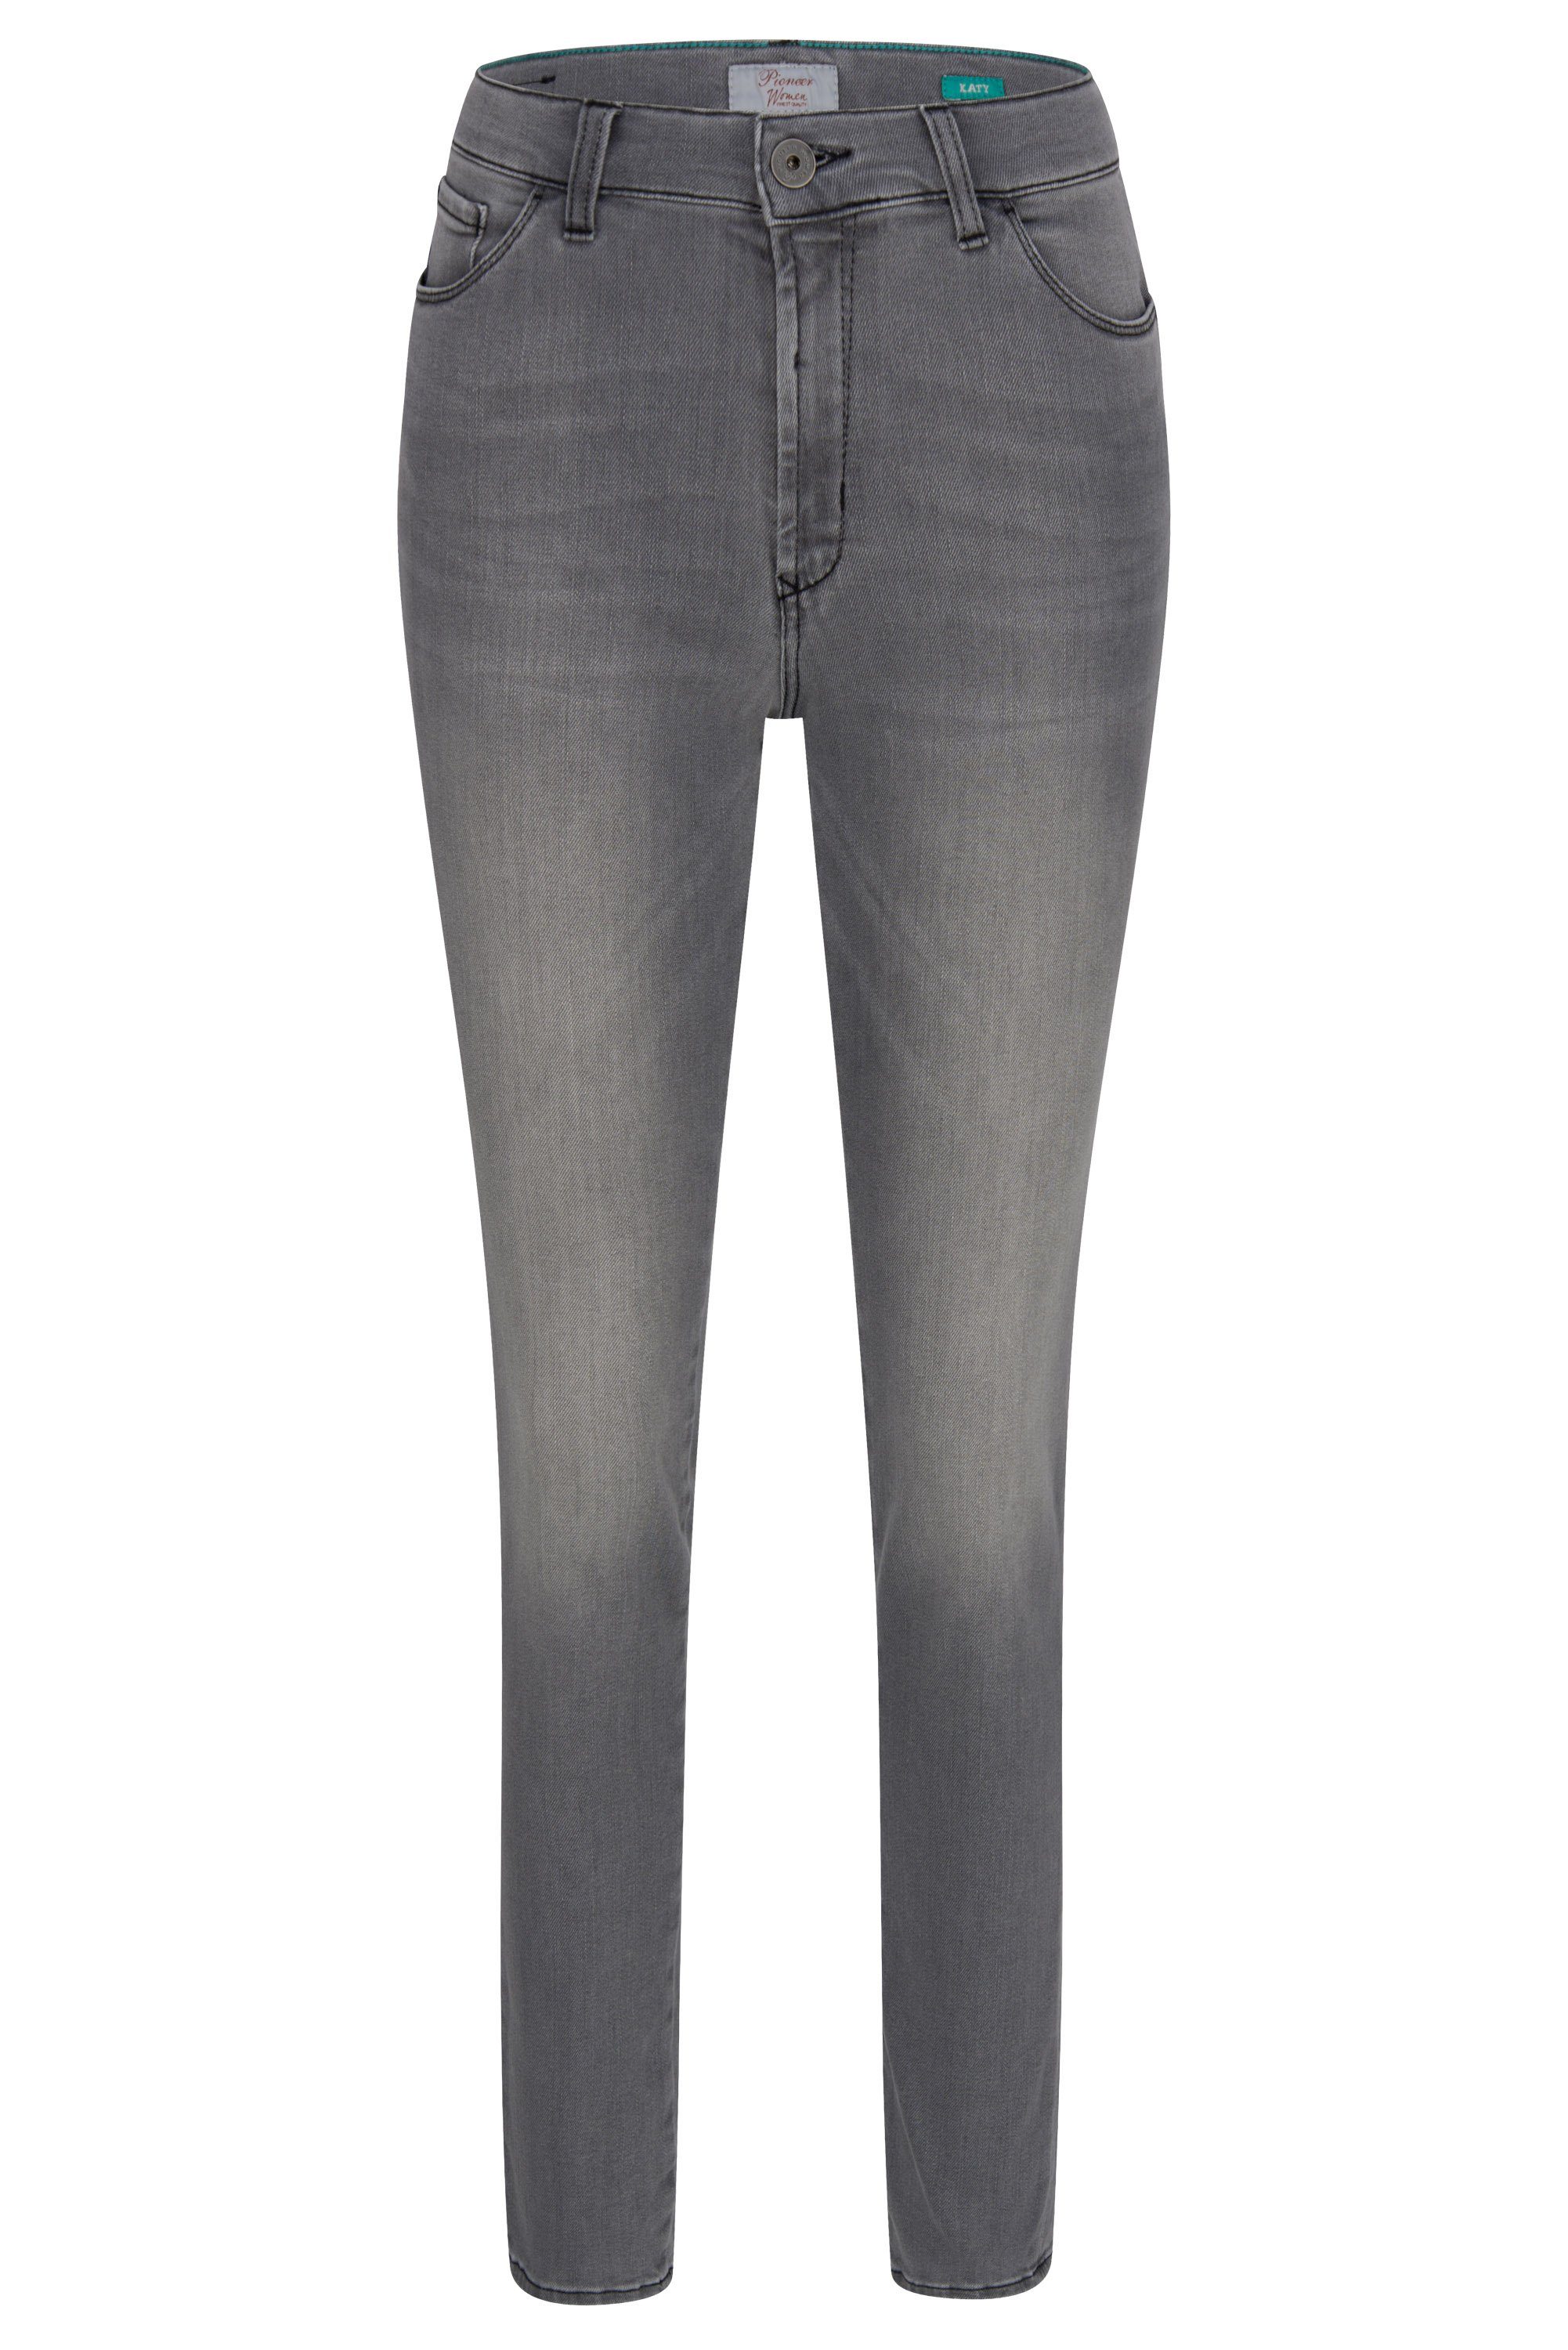 3011 POWERSTRETCH Stretch-Jeans buffies grey KATY used Jeans 5012.9834 - Pioneer Authentic PIONEER